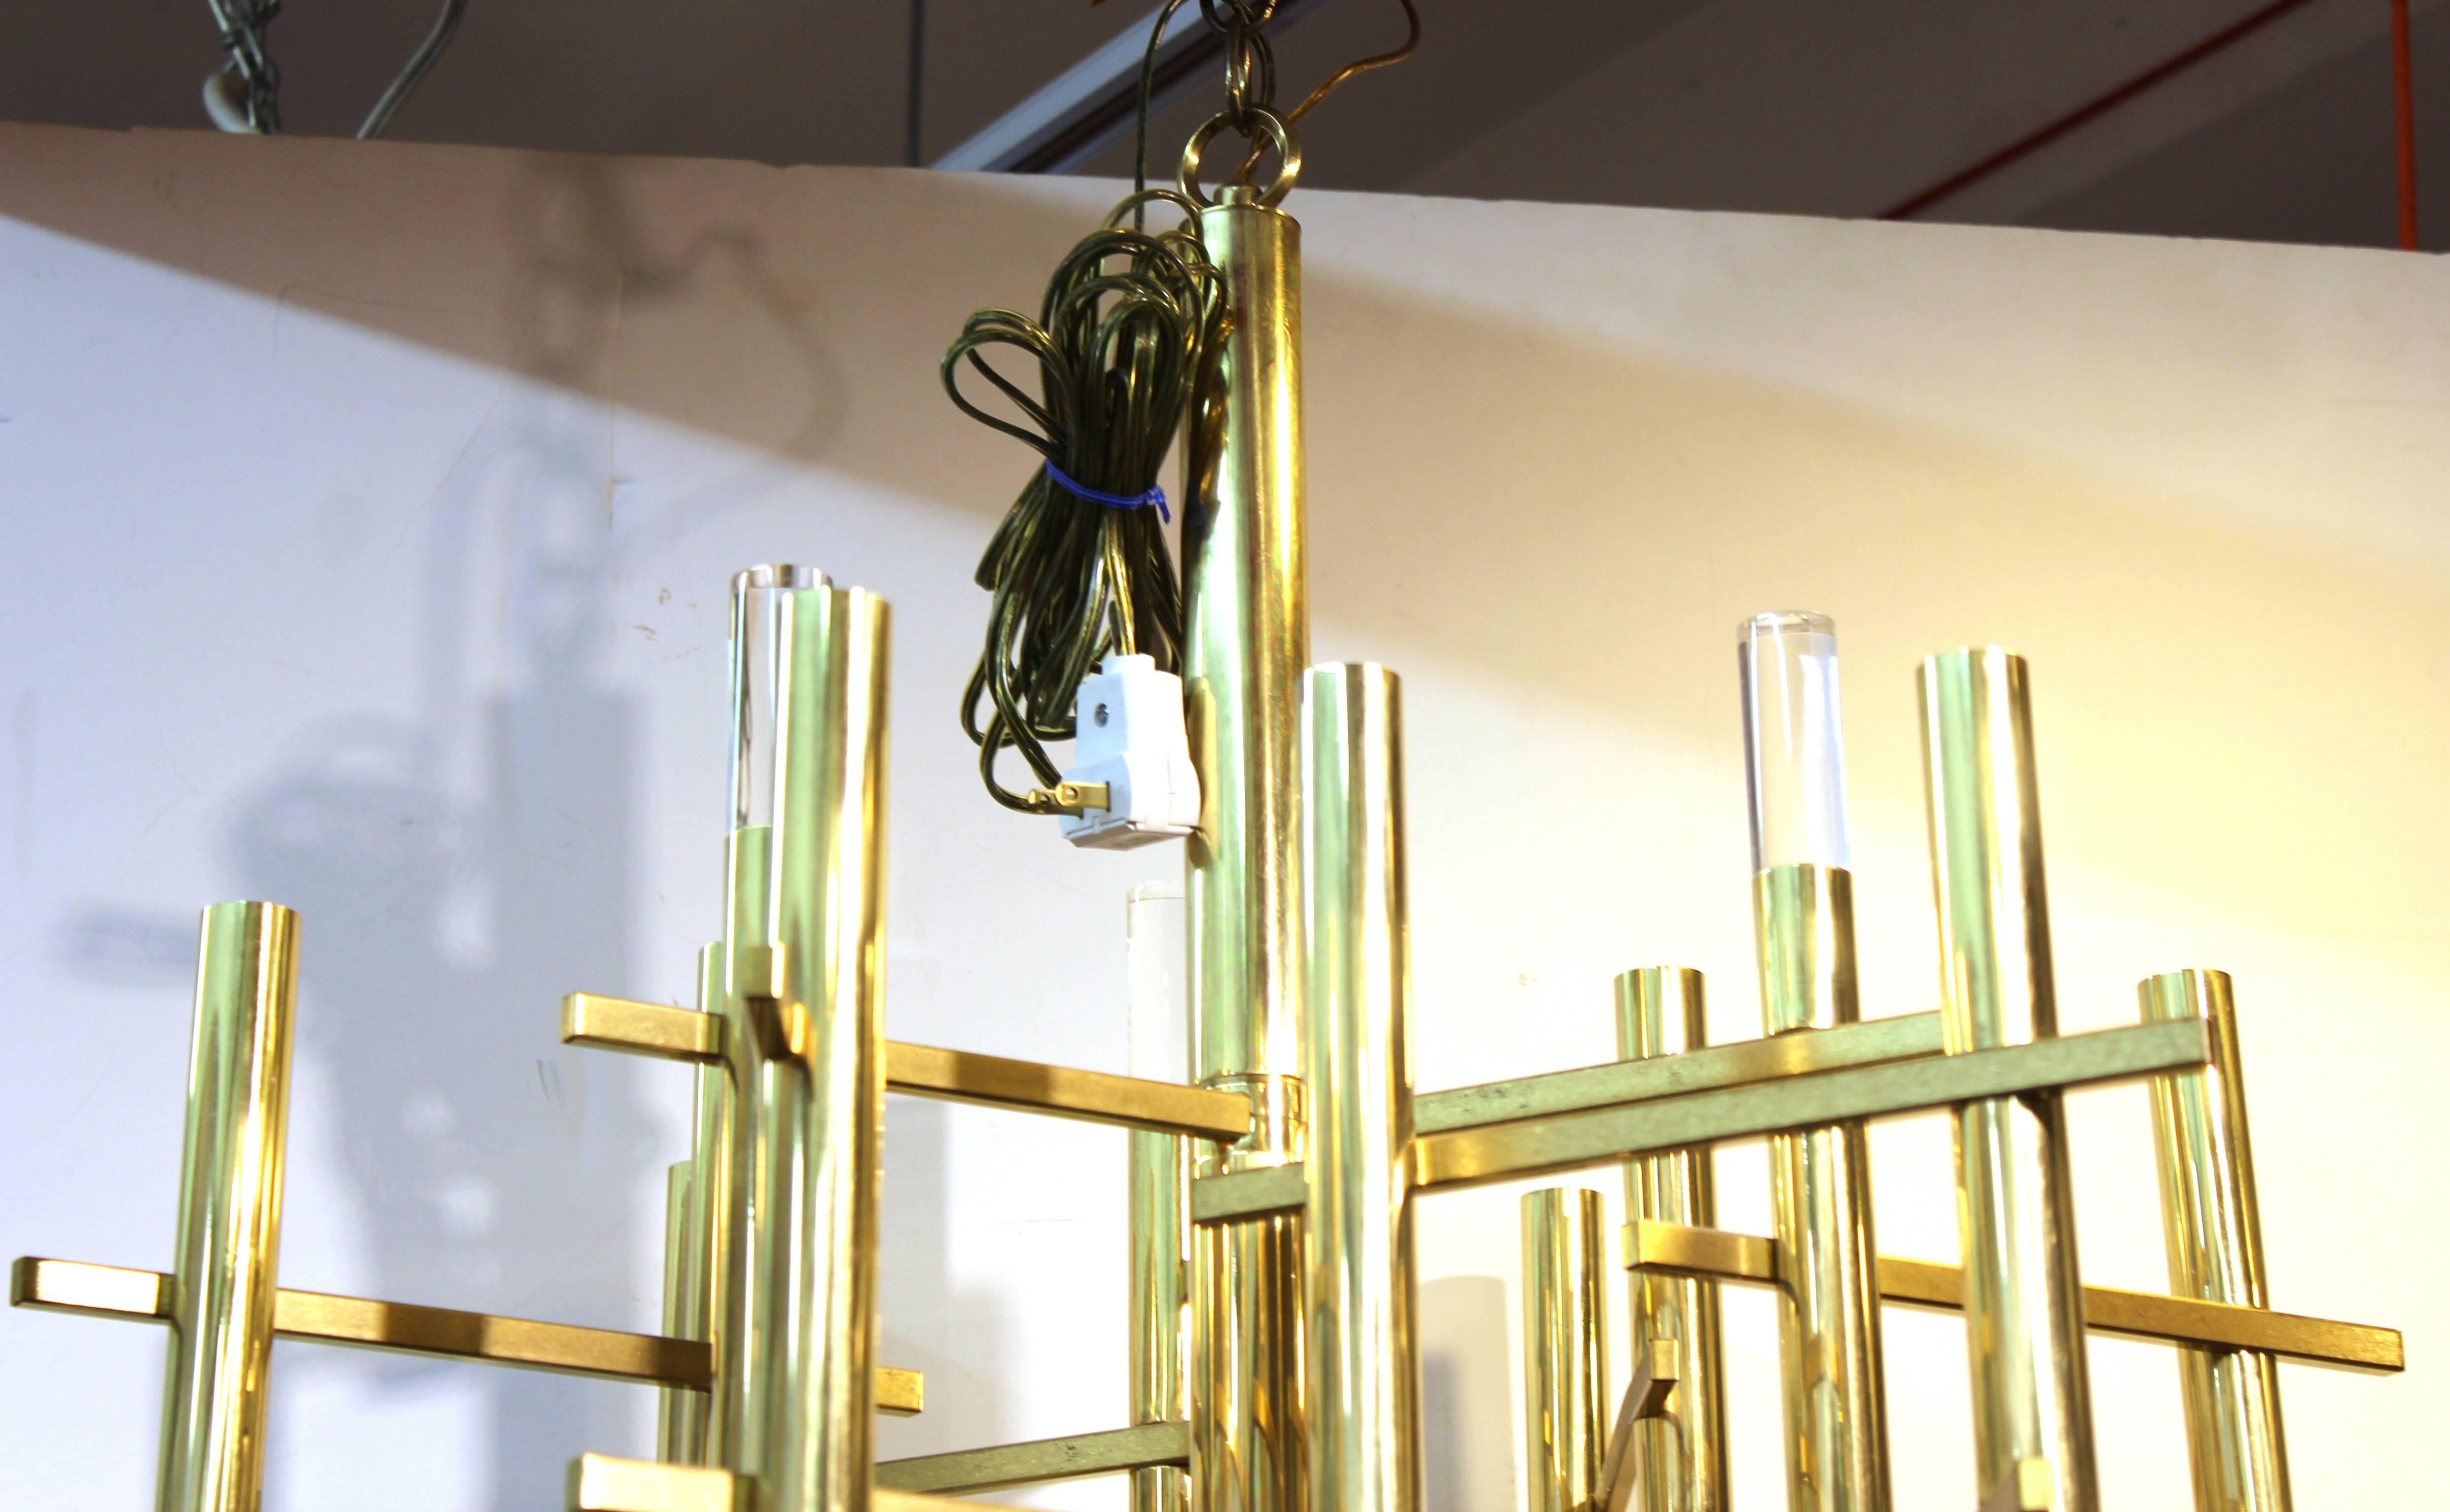 Mid-20th Century Sciolari Italian Atomic Era Chandelier in Polished Brass with Cylindrical Prisms